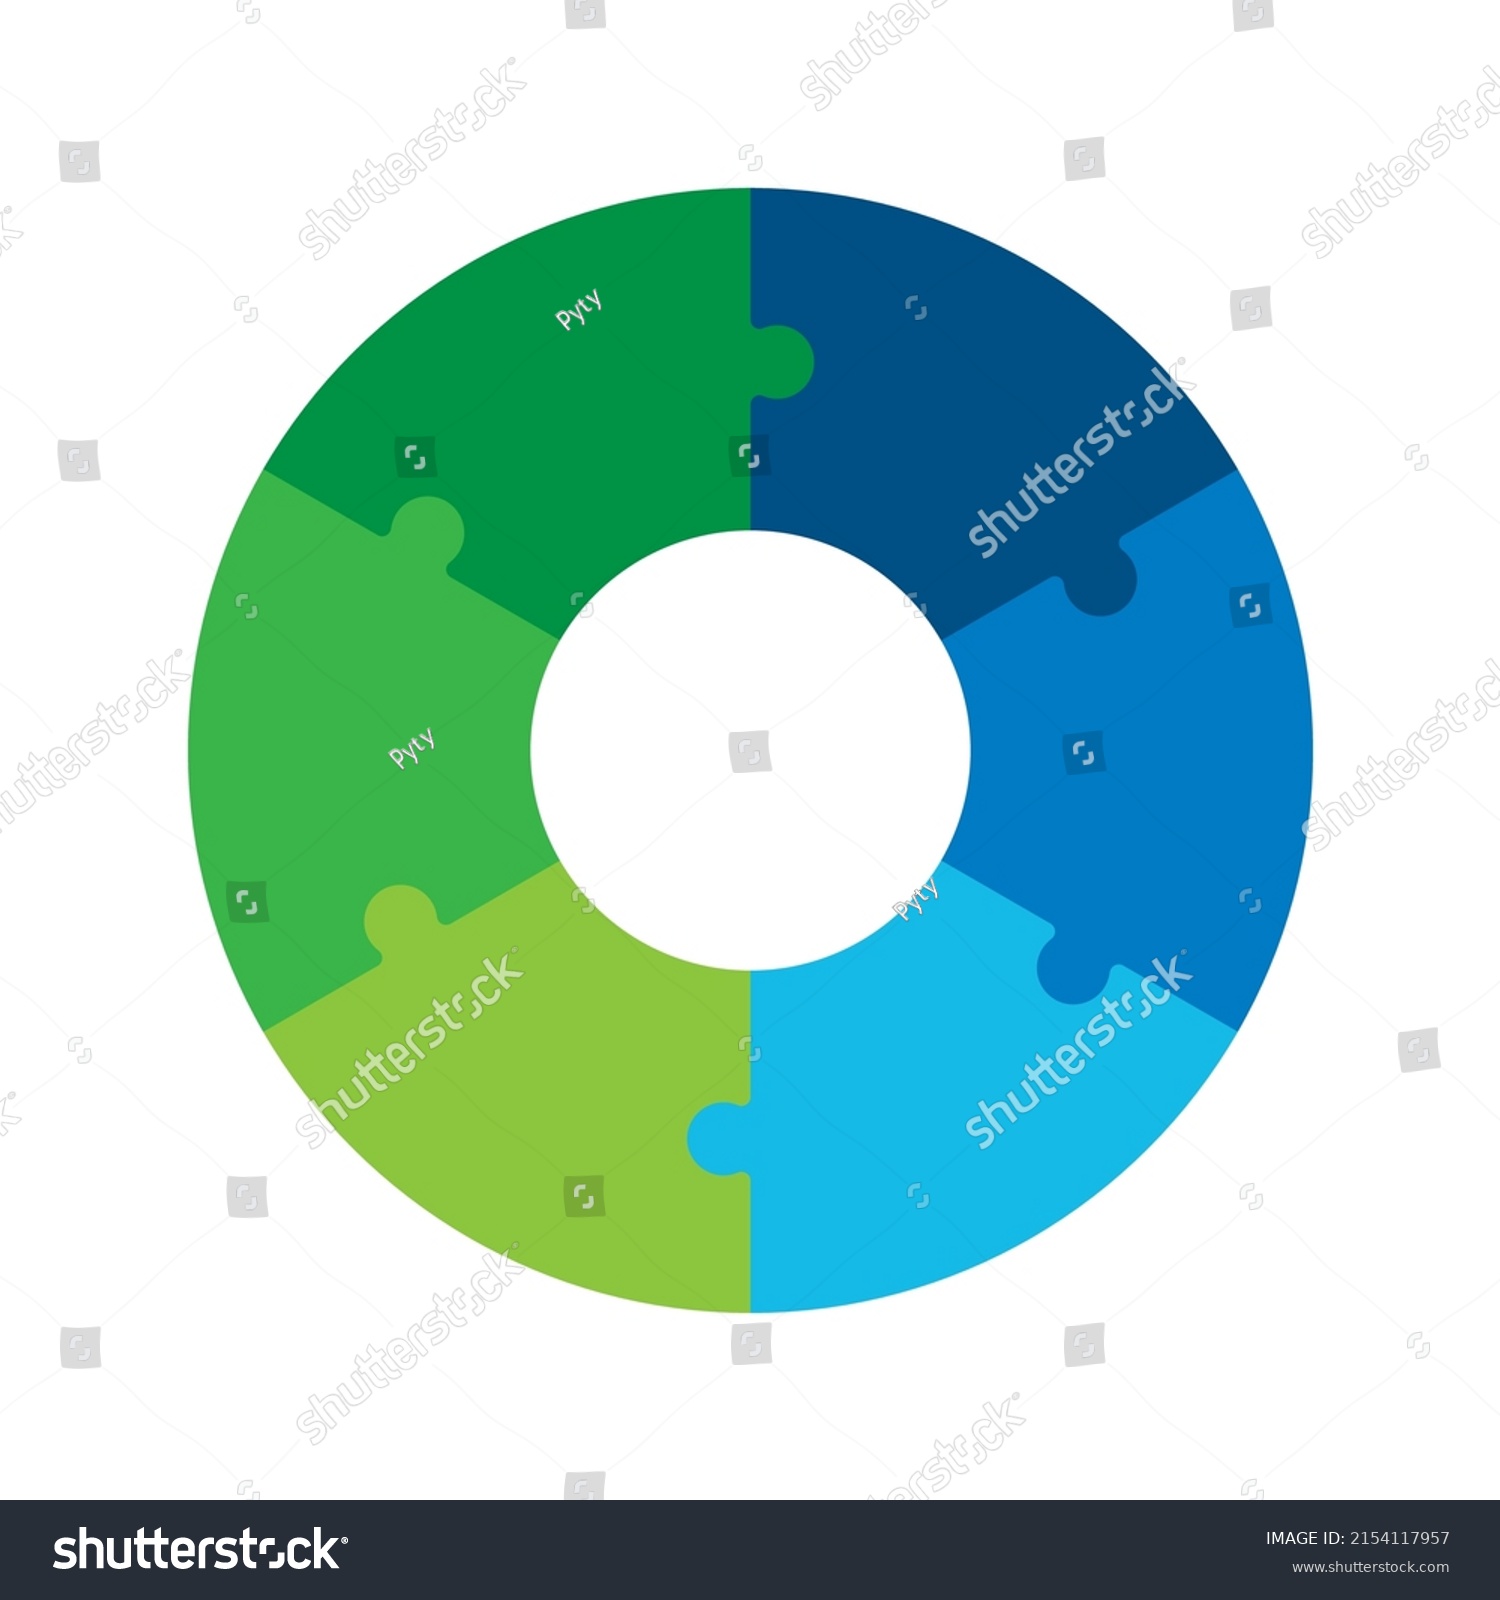 Six Step Modern Infographic Diagram Stock Vector Royalty Free 2154117957 Shutterstock 1413